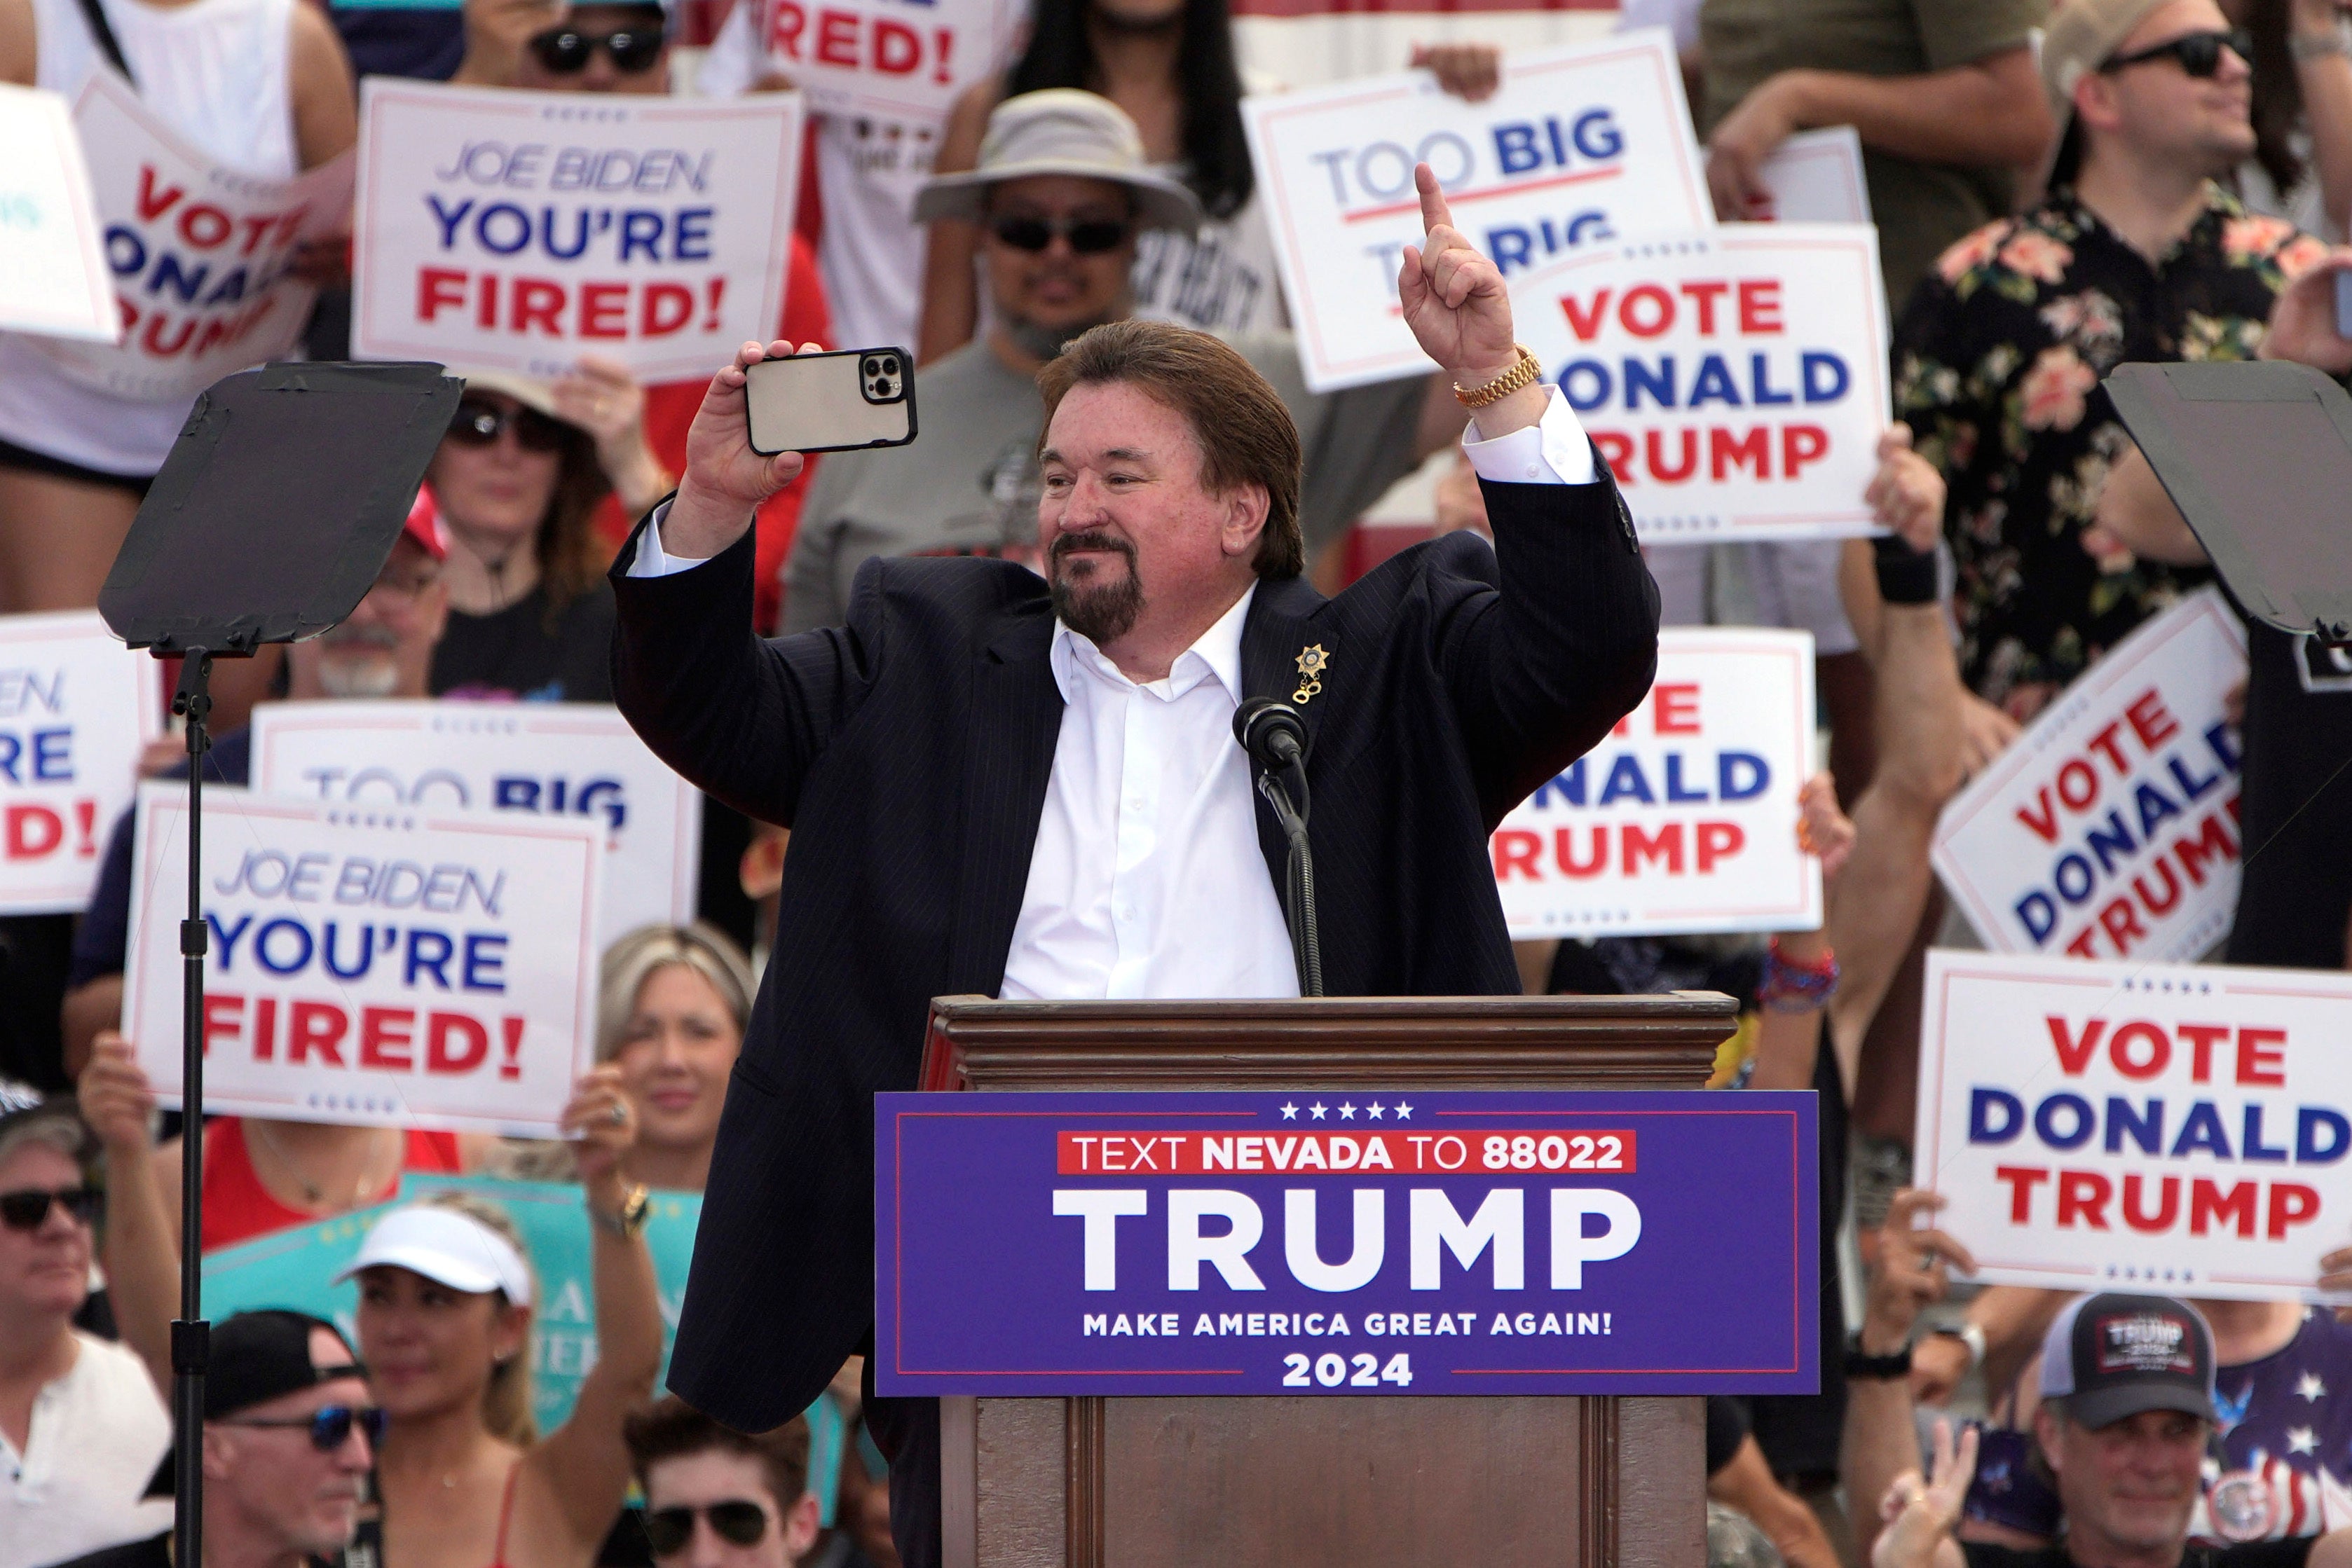 Nevada GOP chair Michael McDonald speaks to Donald Trump’s supporters ata campaign rally in Las Vegas on June 9. Charges against him and other so-called ‘fake electors’ were dismissed on June 21.